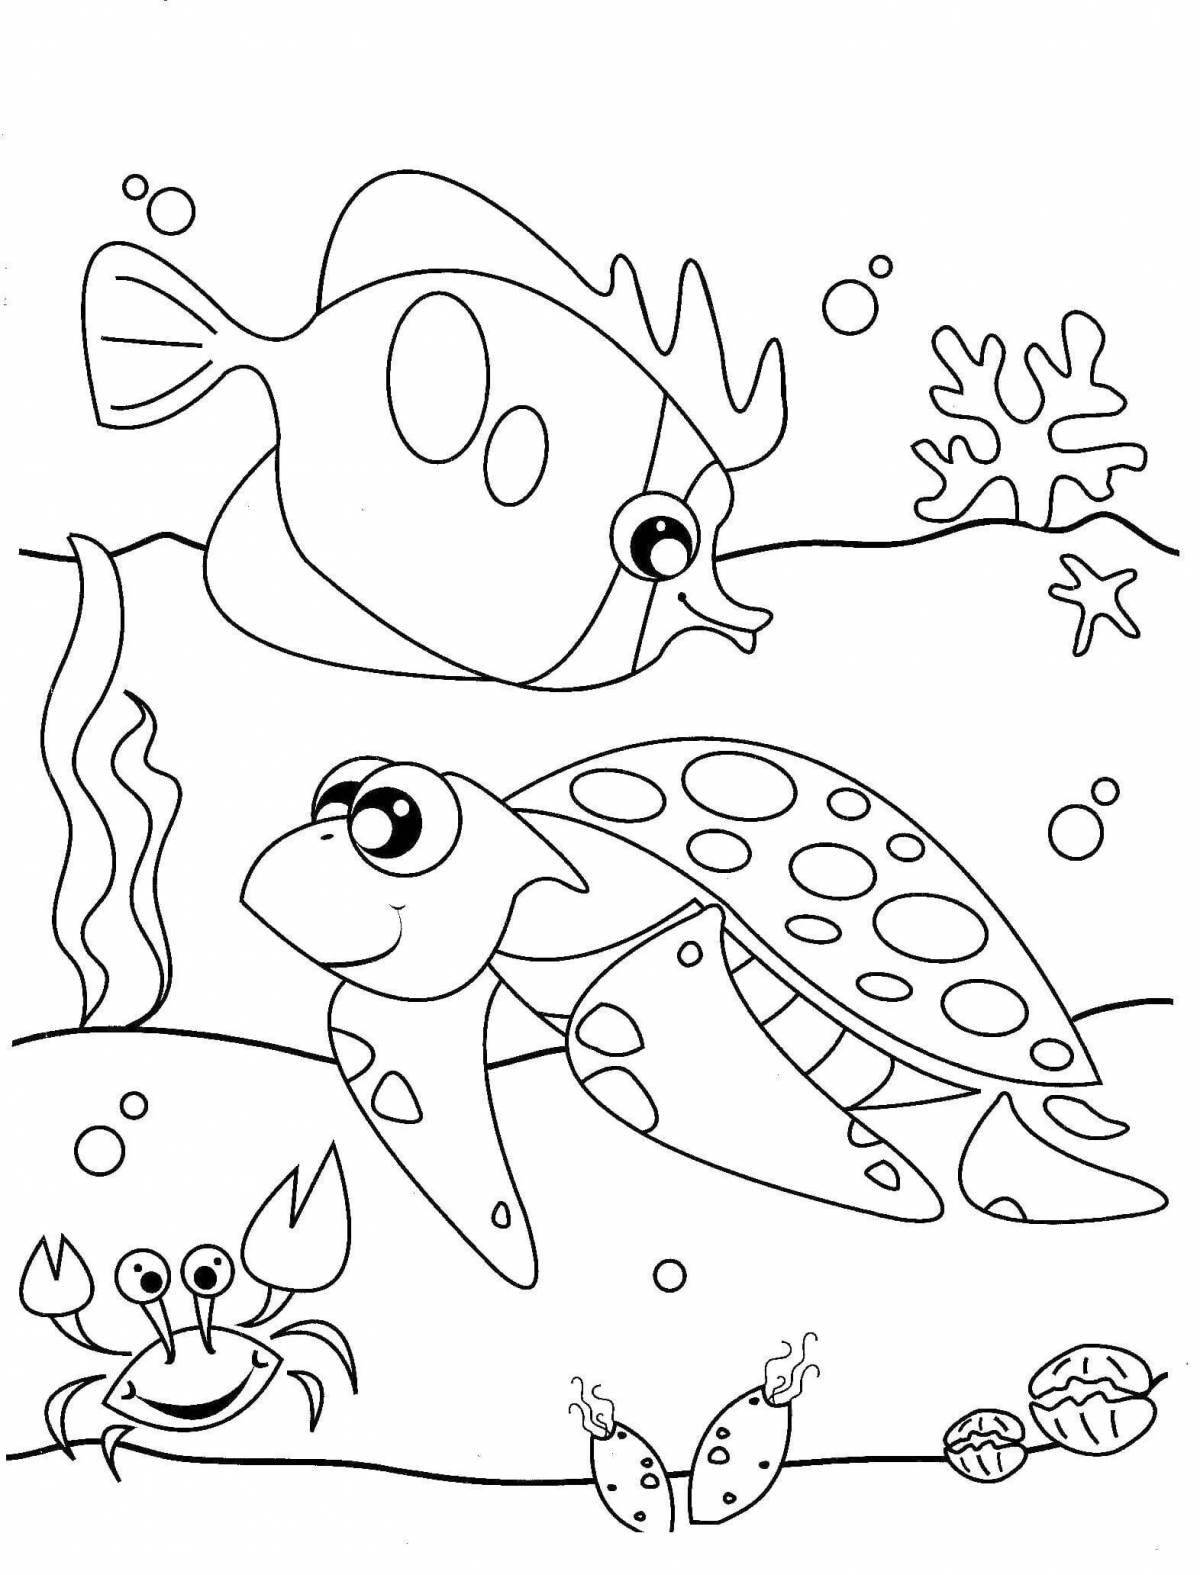 Intriguing coloring pages animals of the seas and oceans